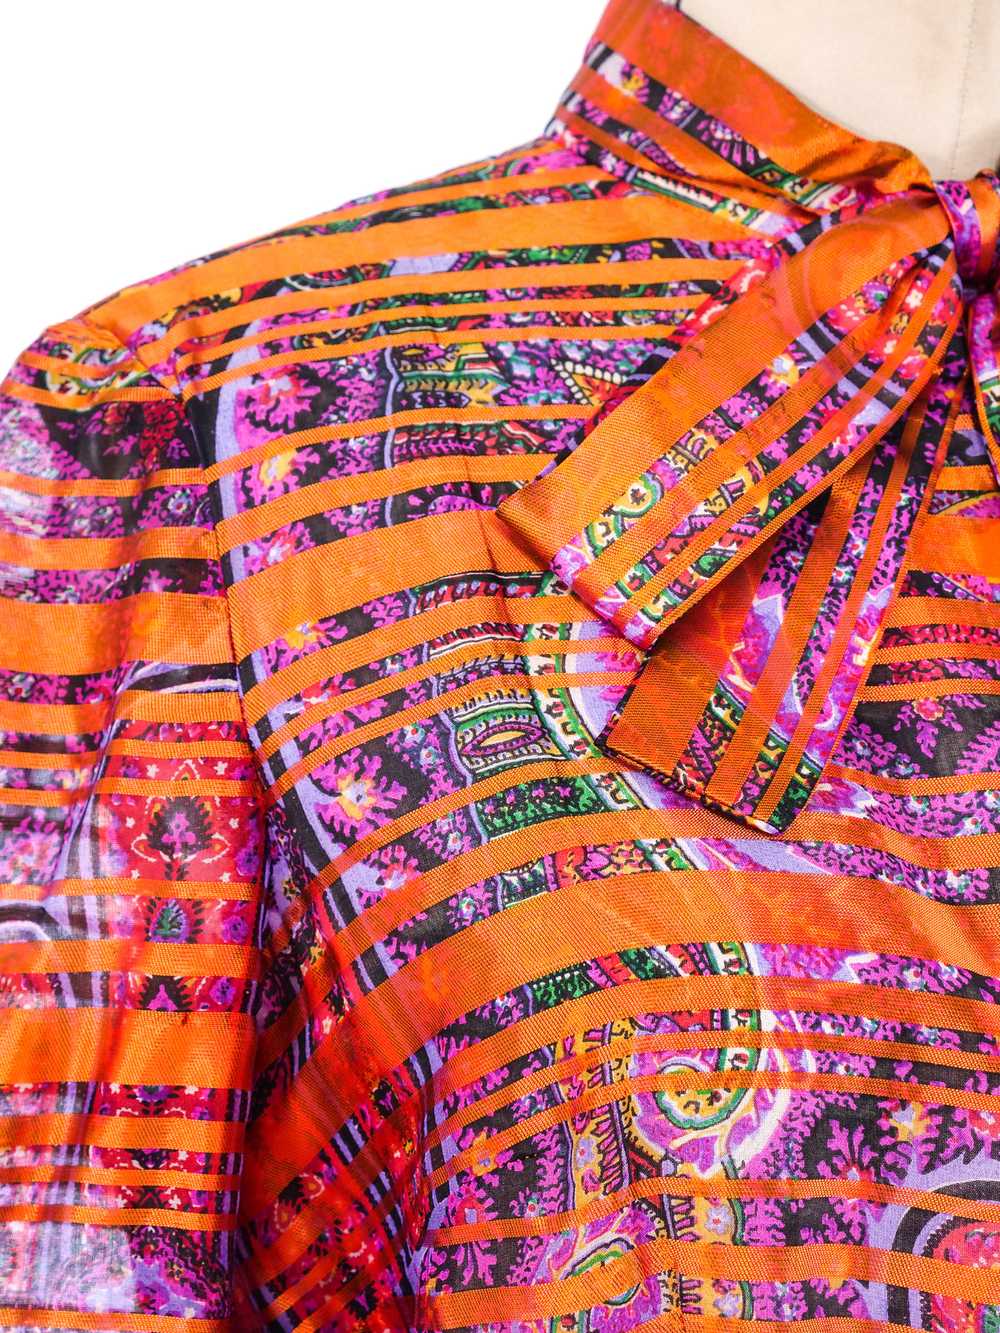 Psychedelic Paisley Printed Striped Dress - image 4